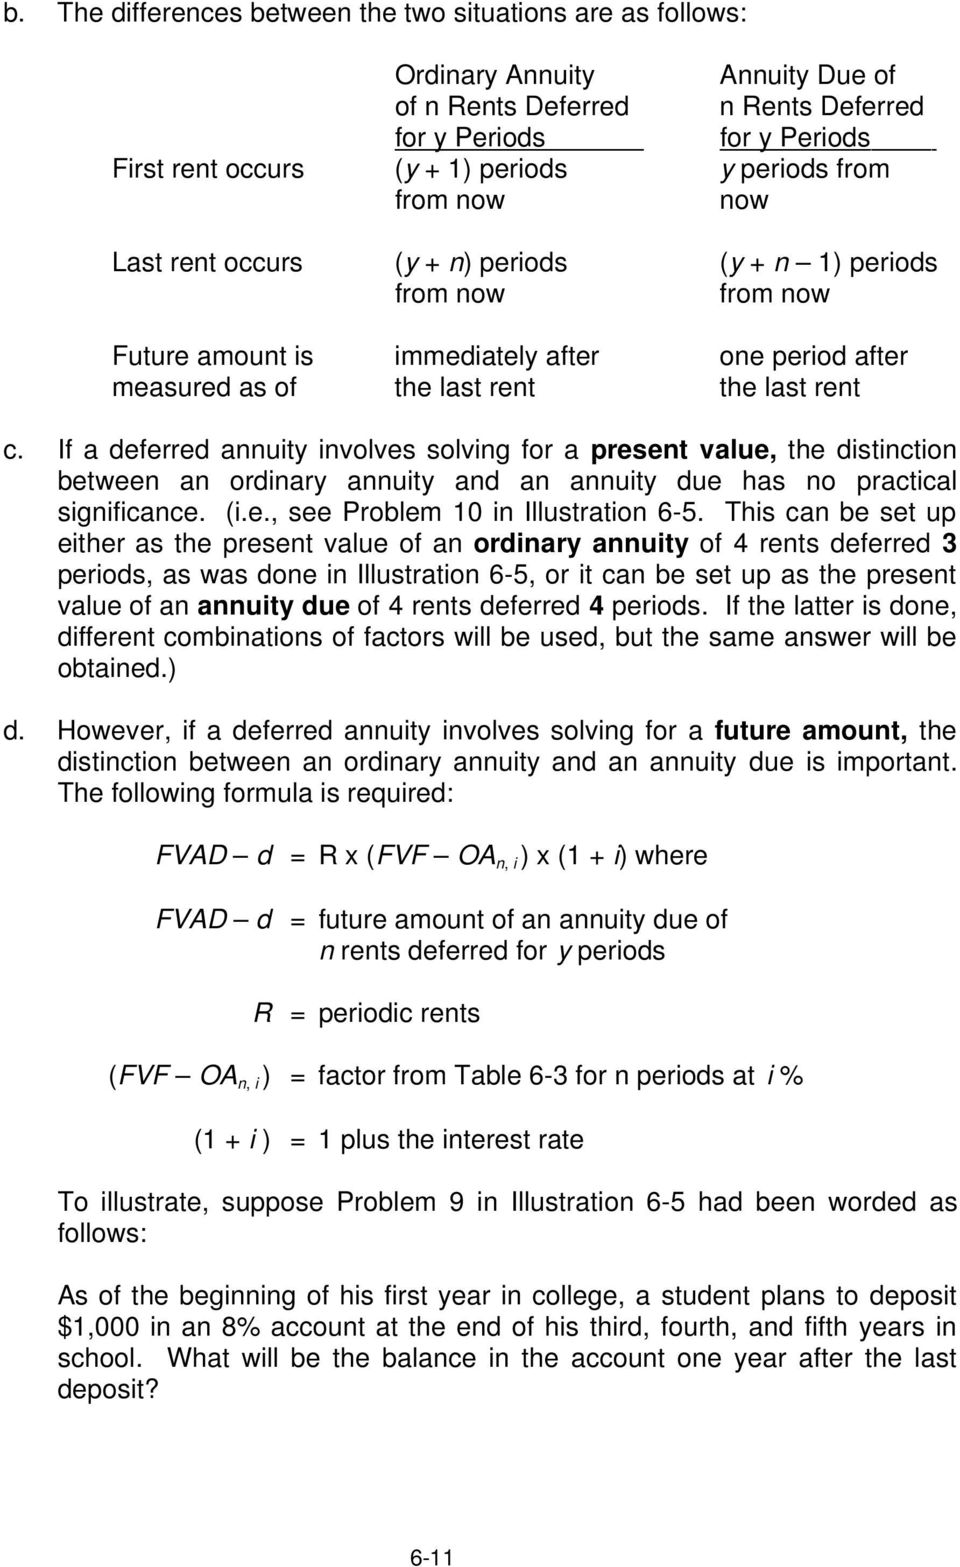 If a deferred annuity involves solving for a present value, the distinction between an ordinary annuity and an annuity due has no practical significance. (i.e., see Problem 10 in Illustration 6-5.